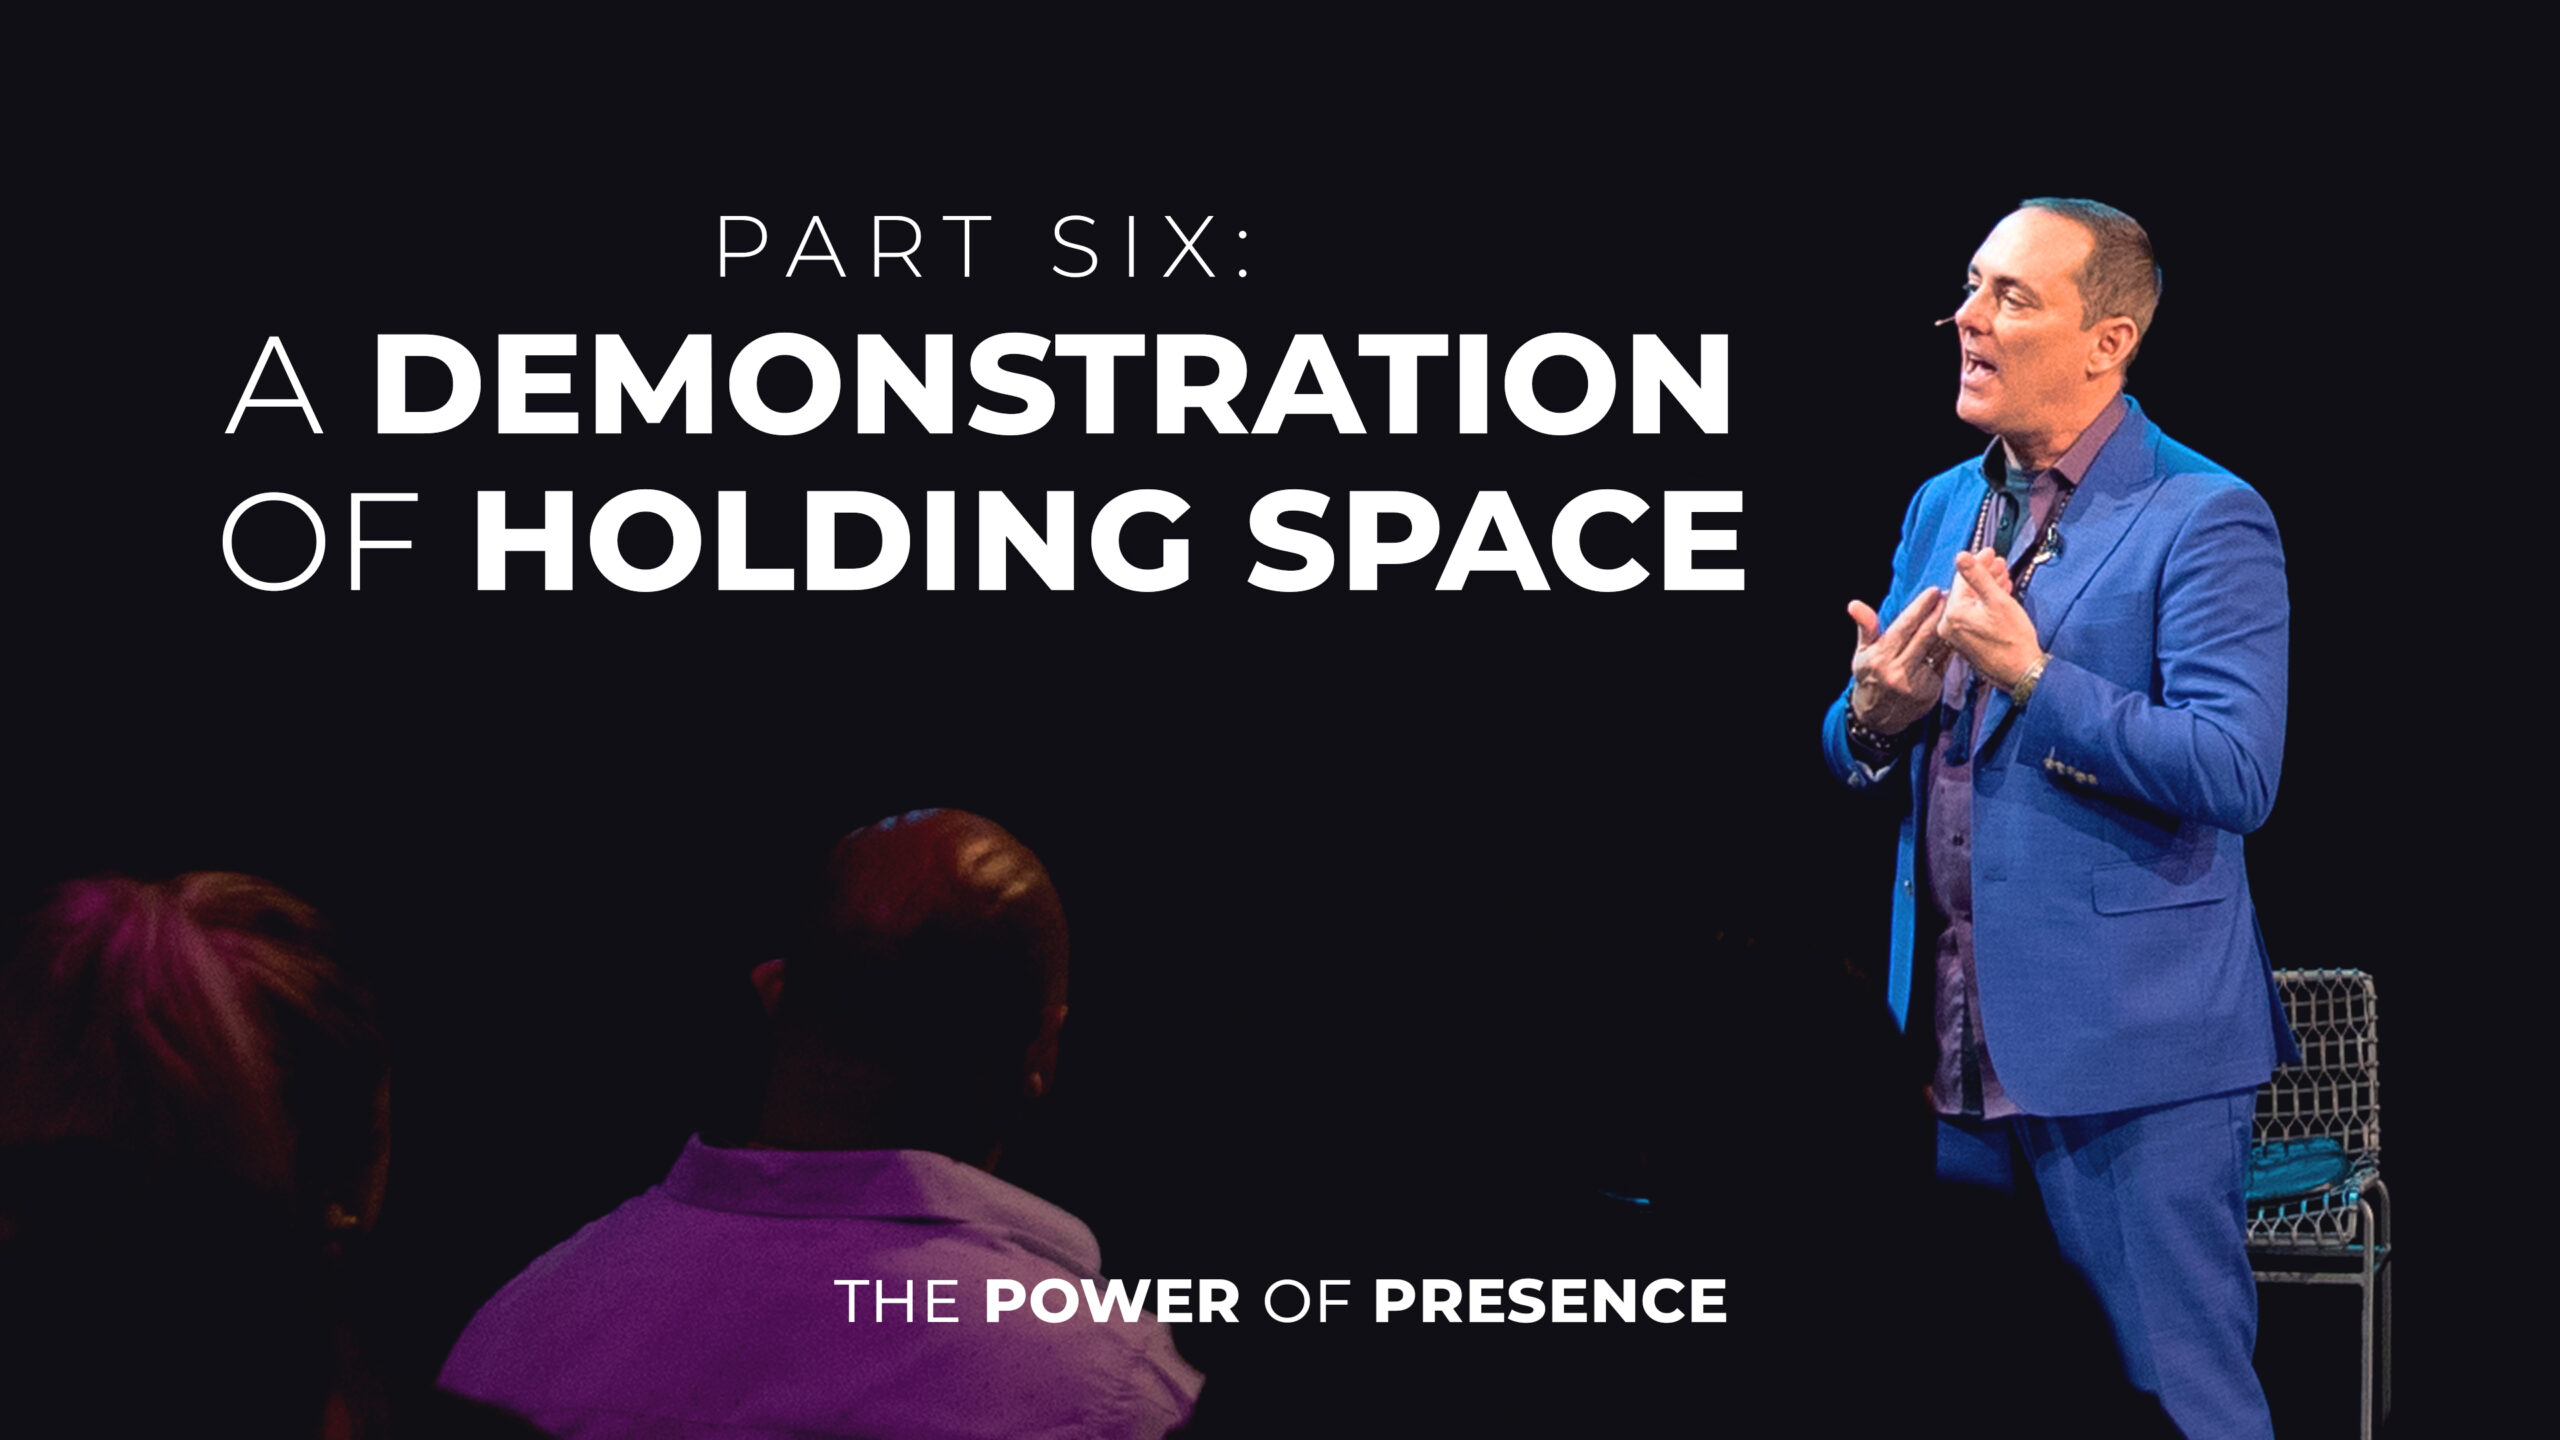 Part Six: A Demonstration of Holding Space